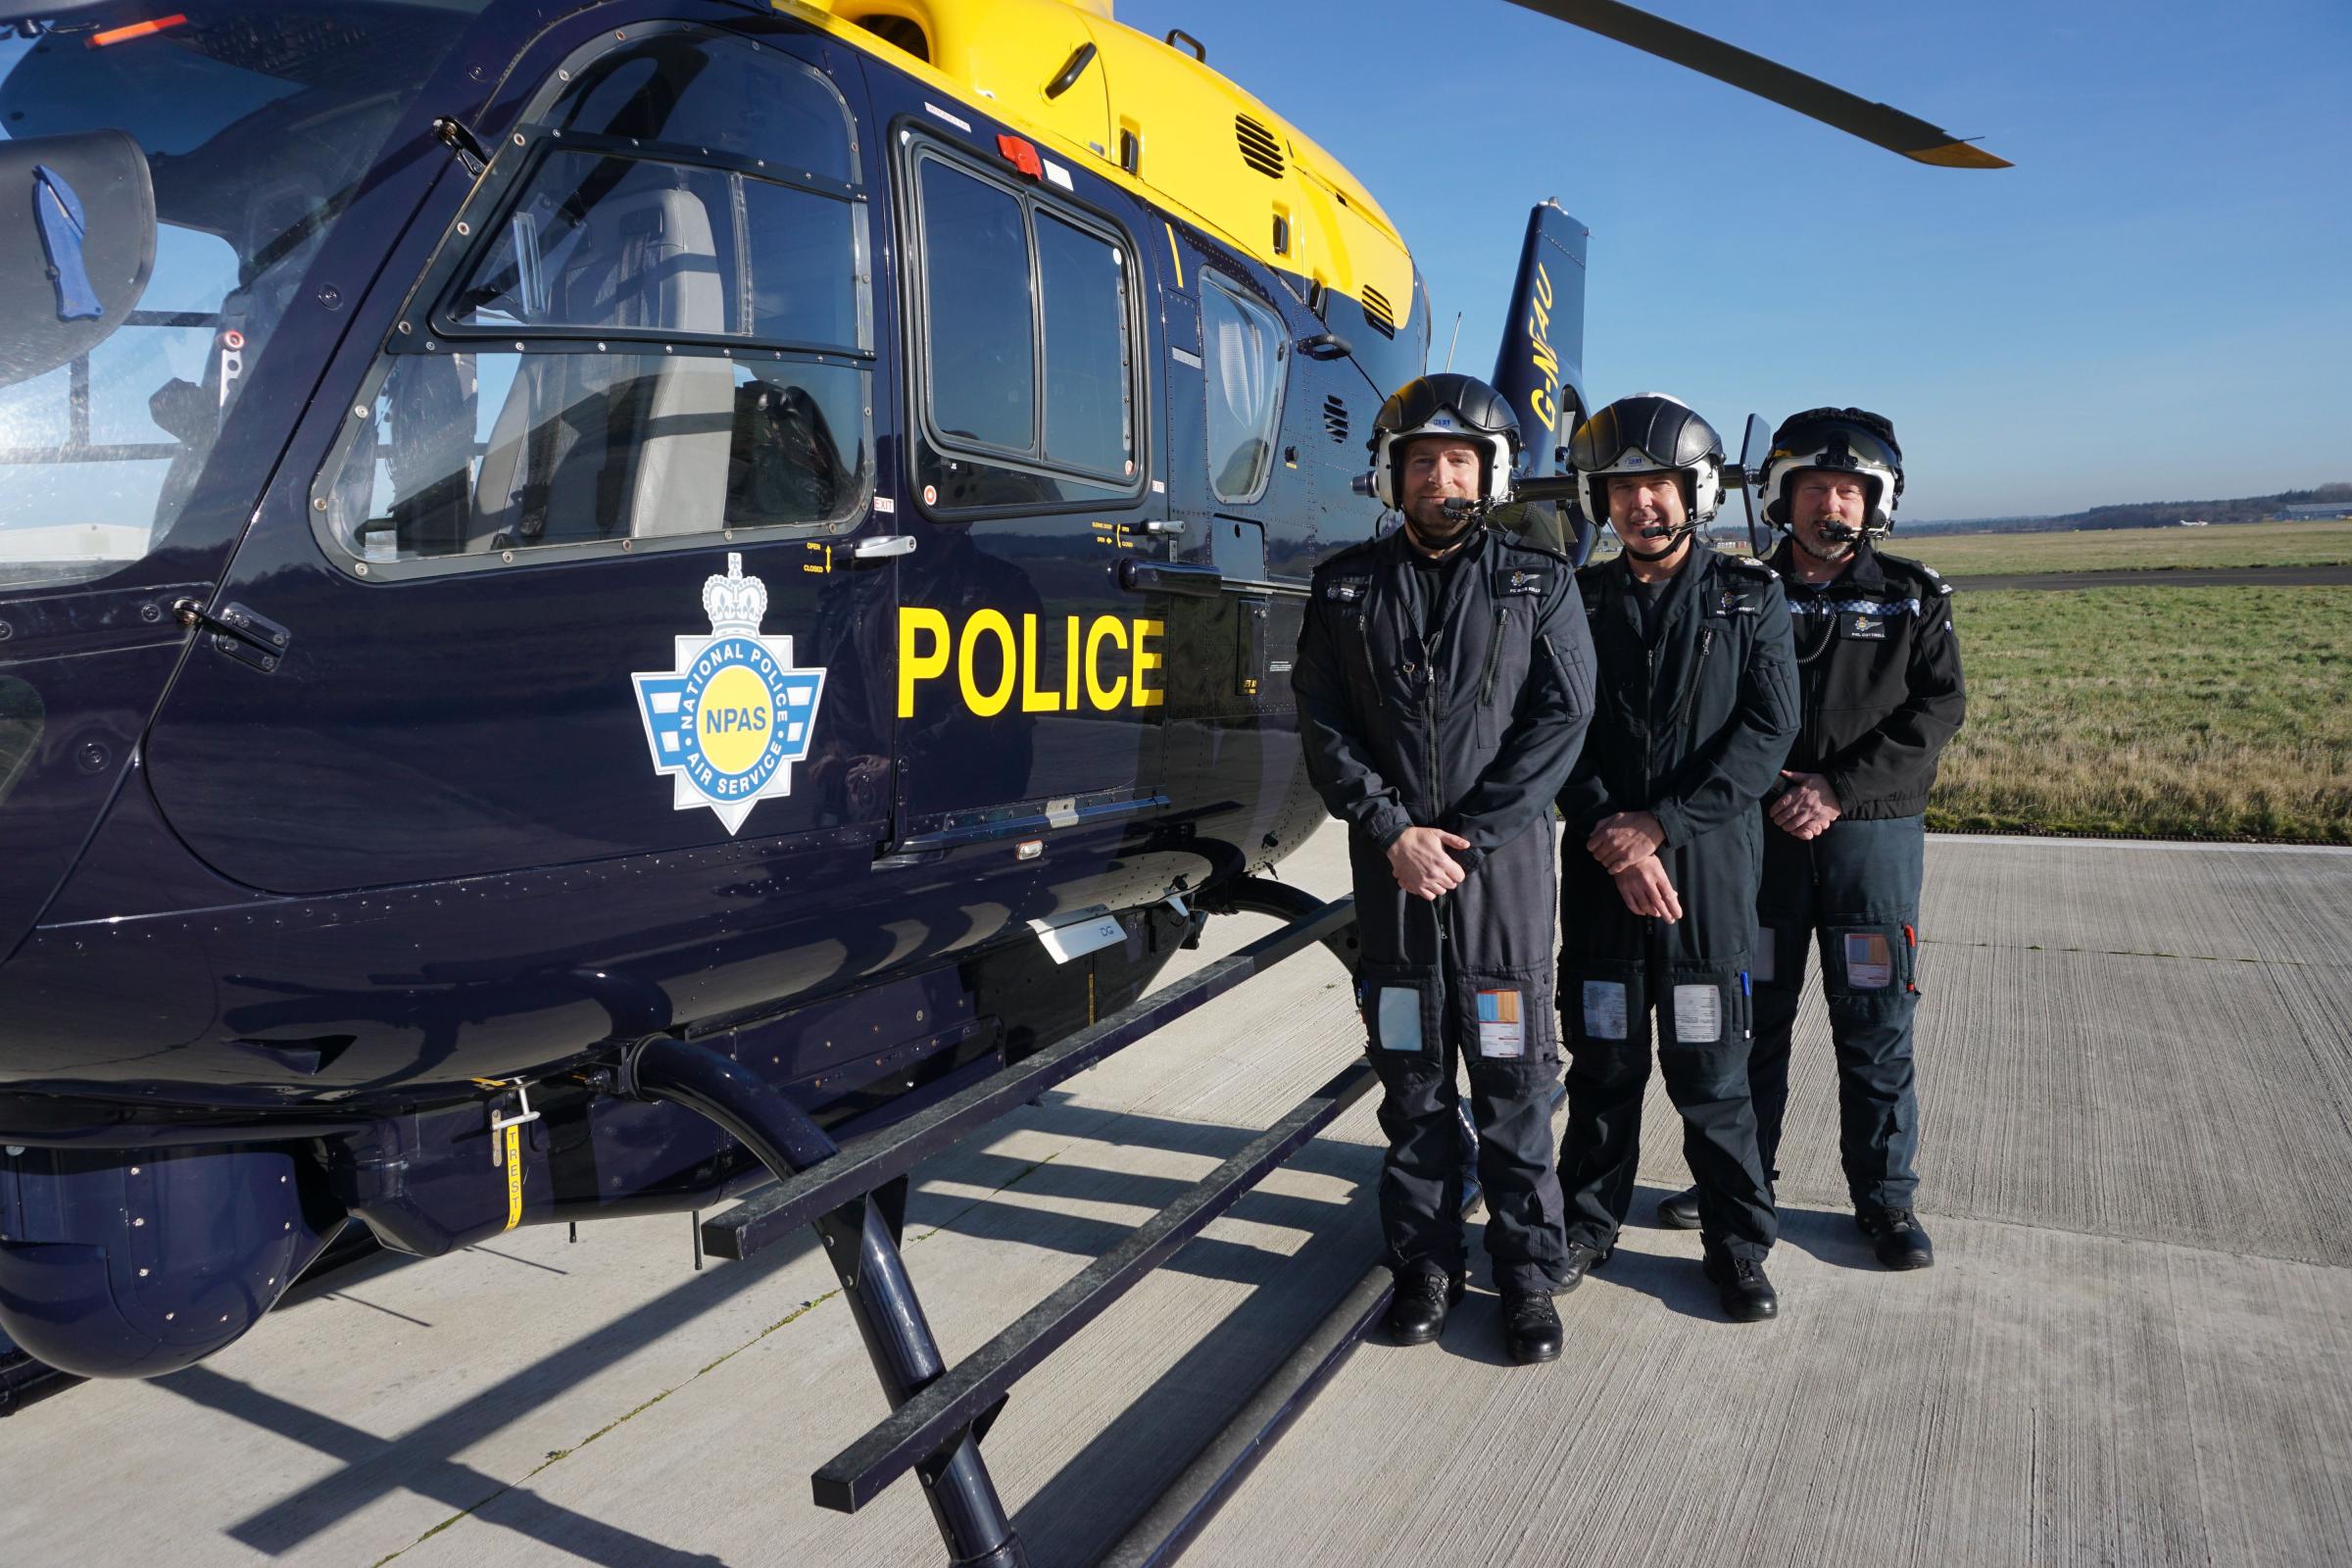 That new sound you hear over Bournemouth? It's the new (slightly quieter) police helicopter